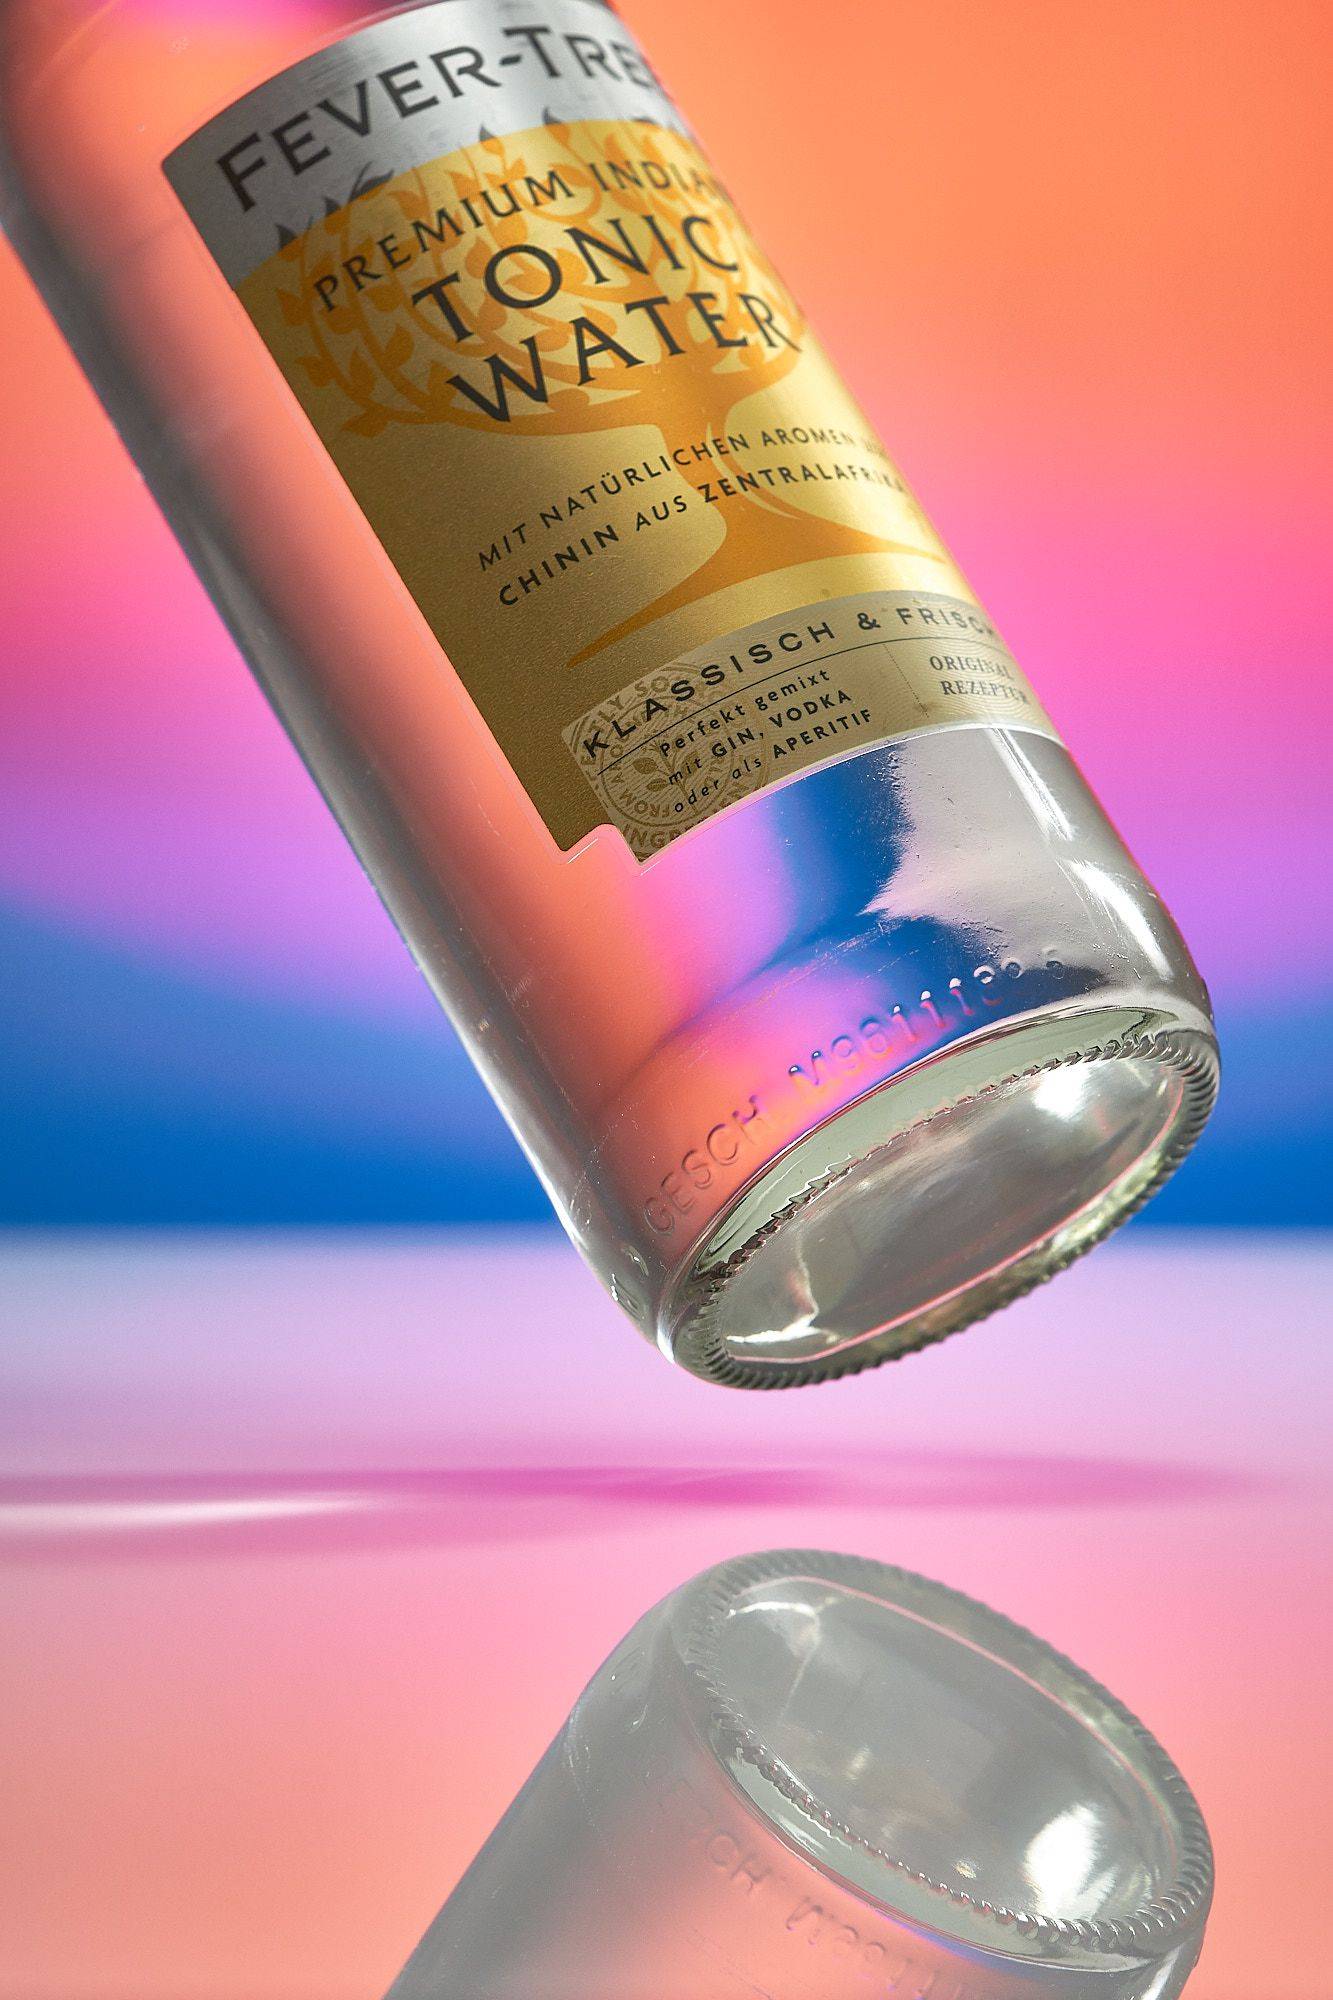 a bottle of fever tree tonic water on rainbow colored background